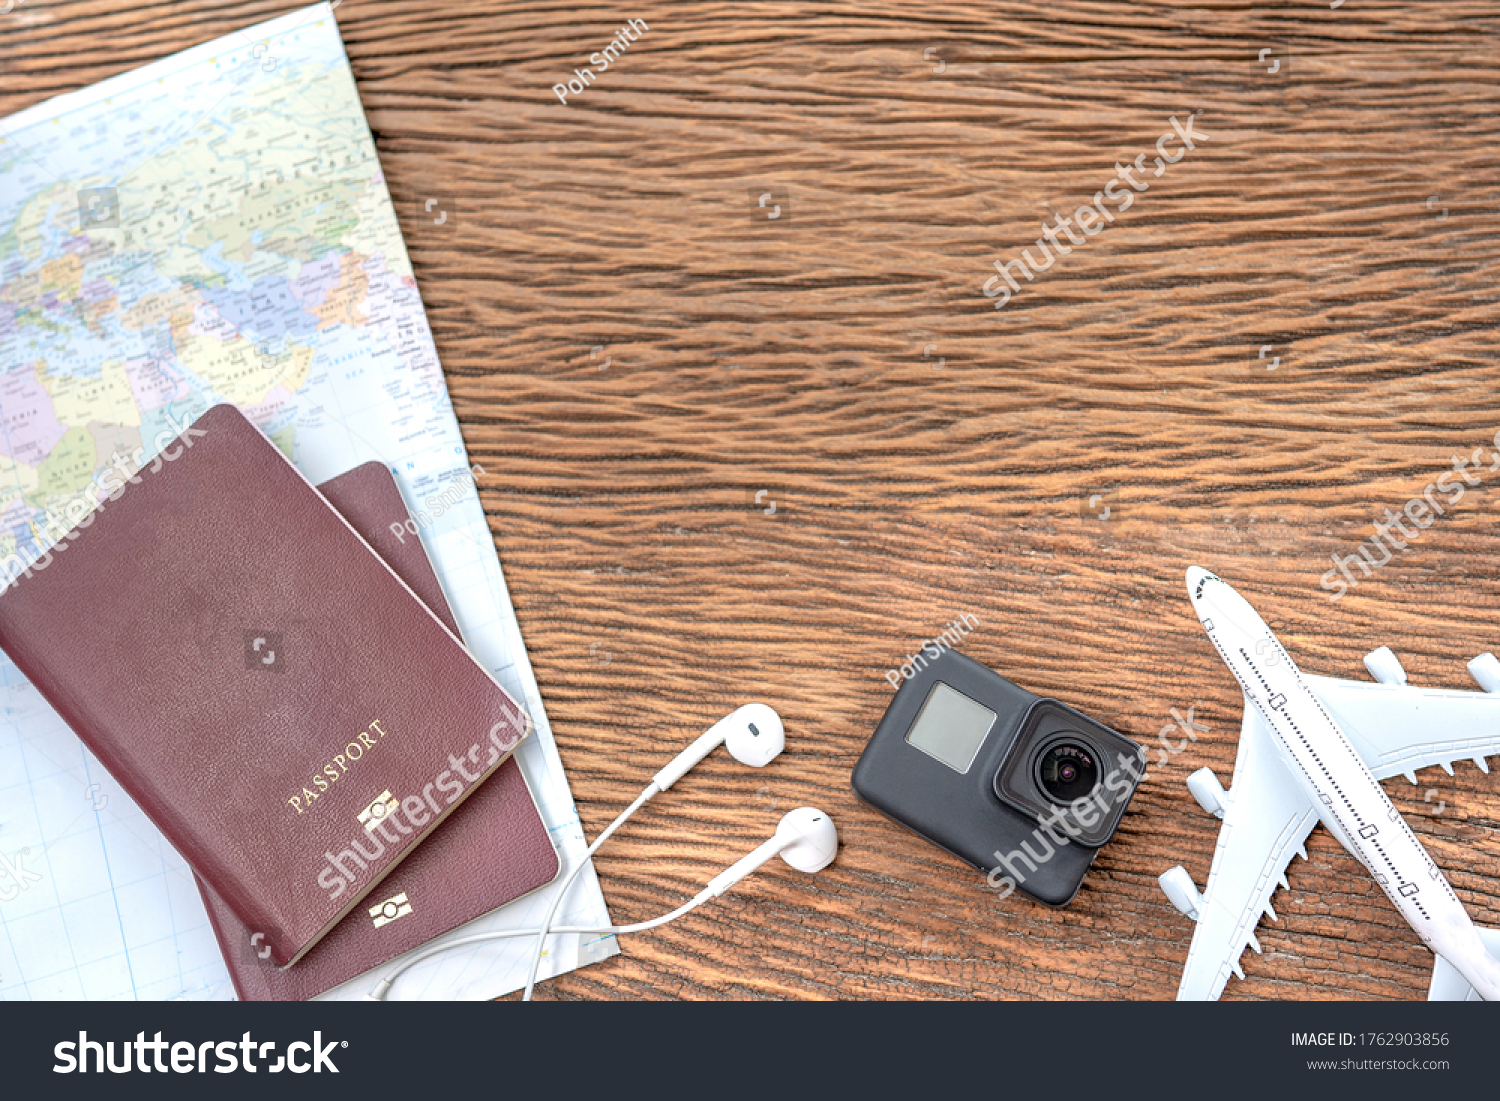 Passport with a map on old wooden background.Travel planning.Top view of traveler accessories with a camera, plane on world map.Preparation for travel.Traveling Journey Vacation Holiday concept. #1762903856